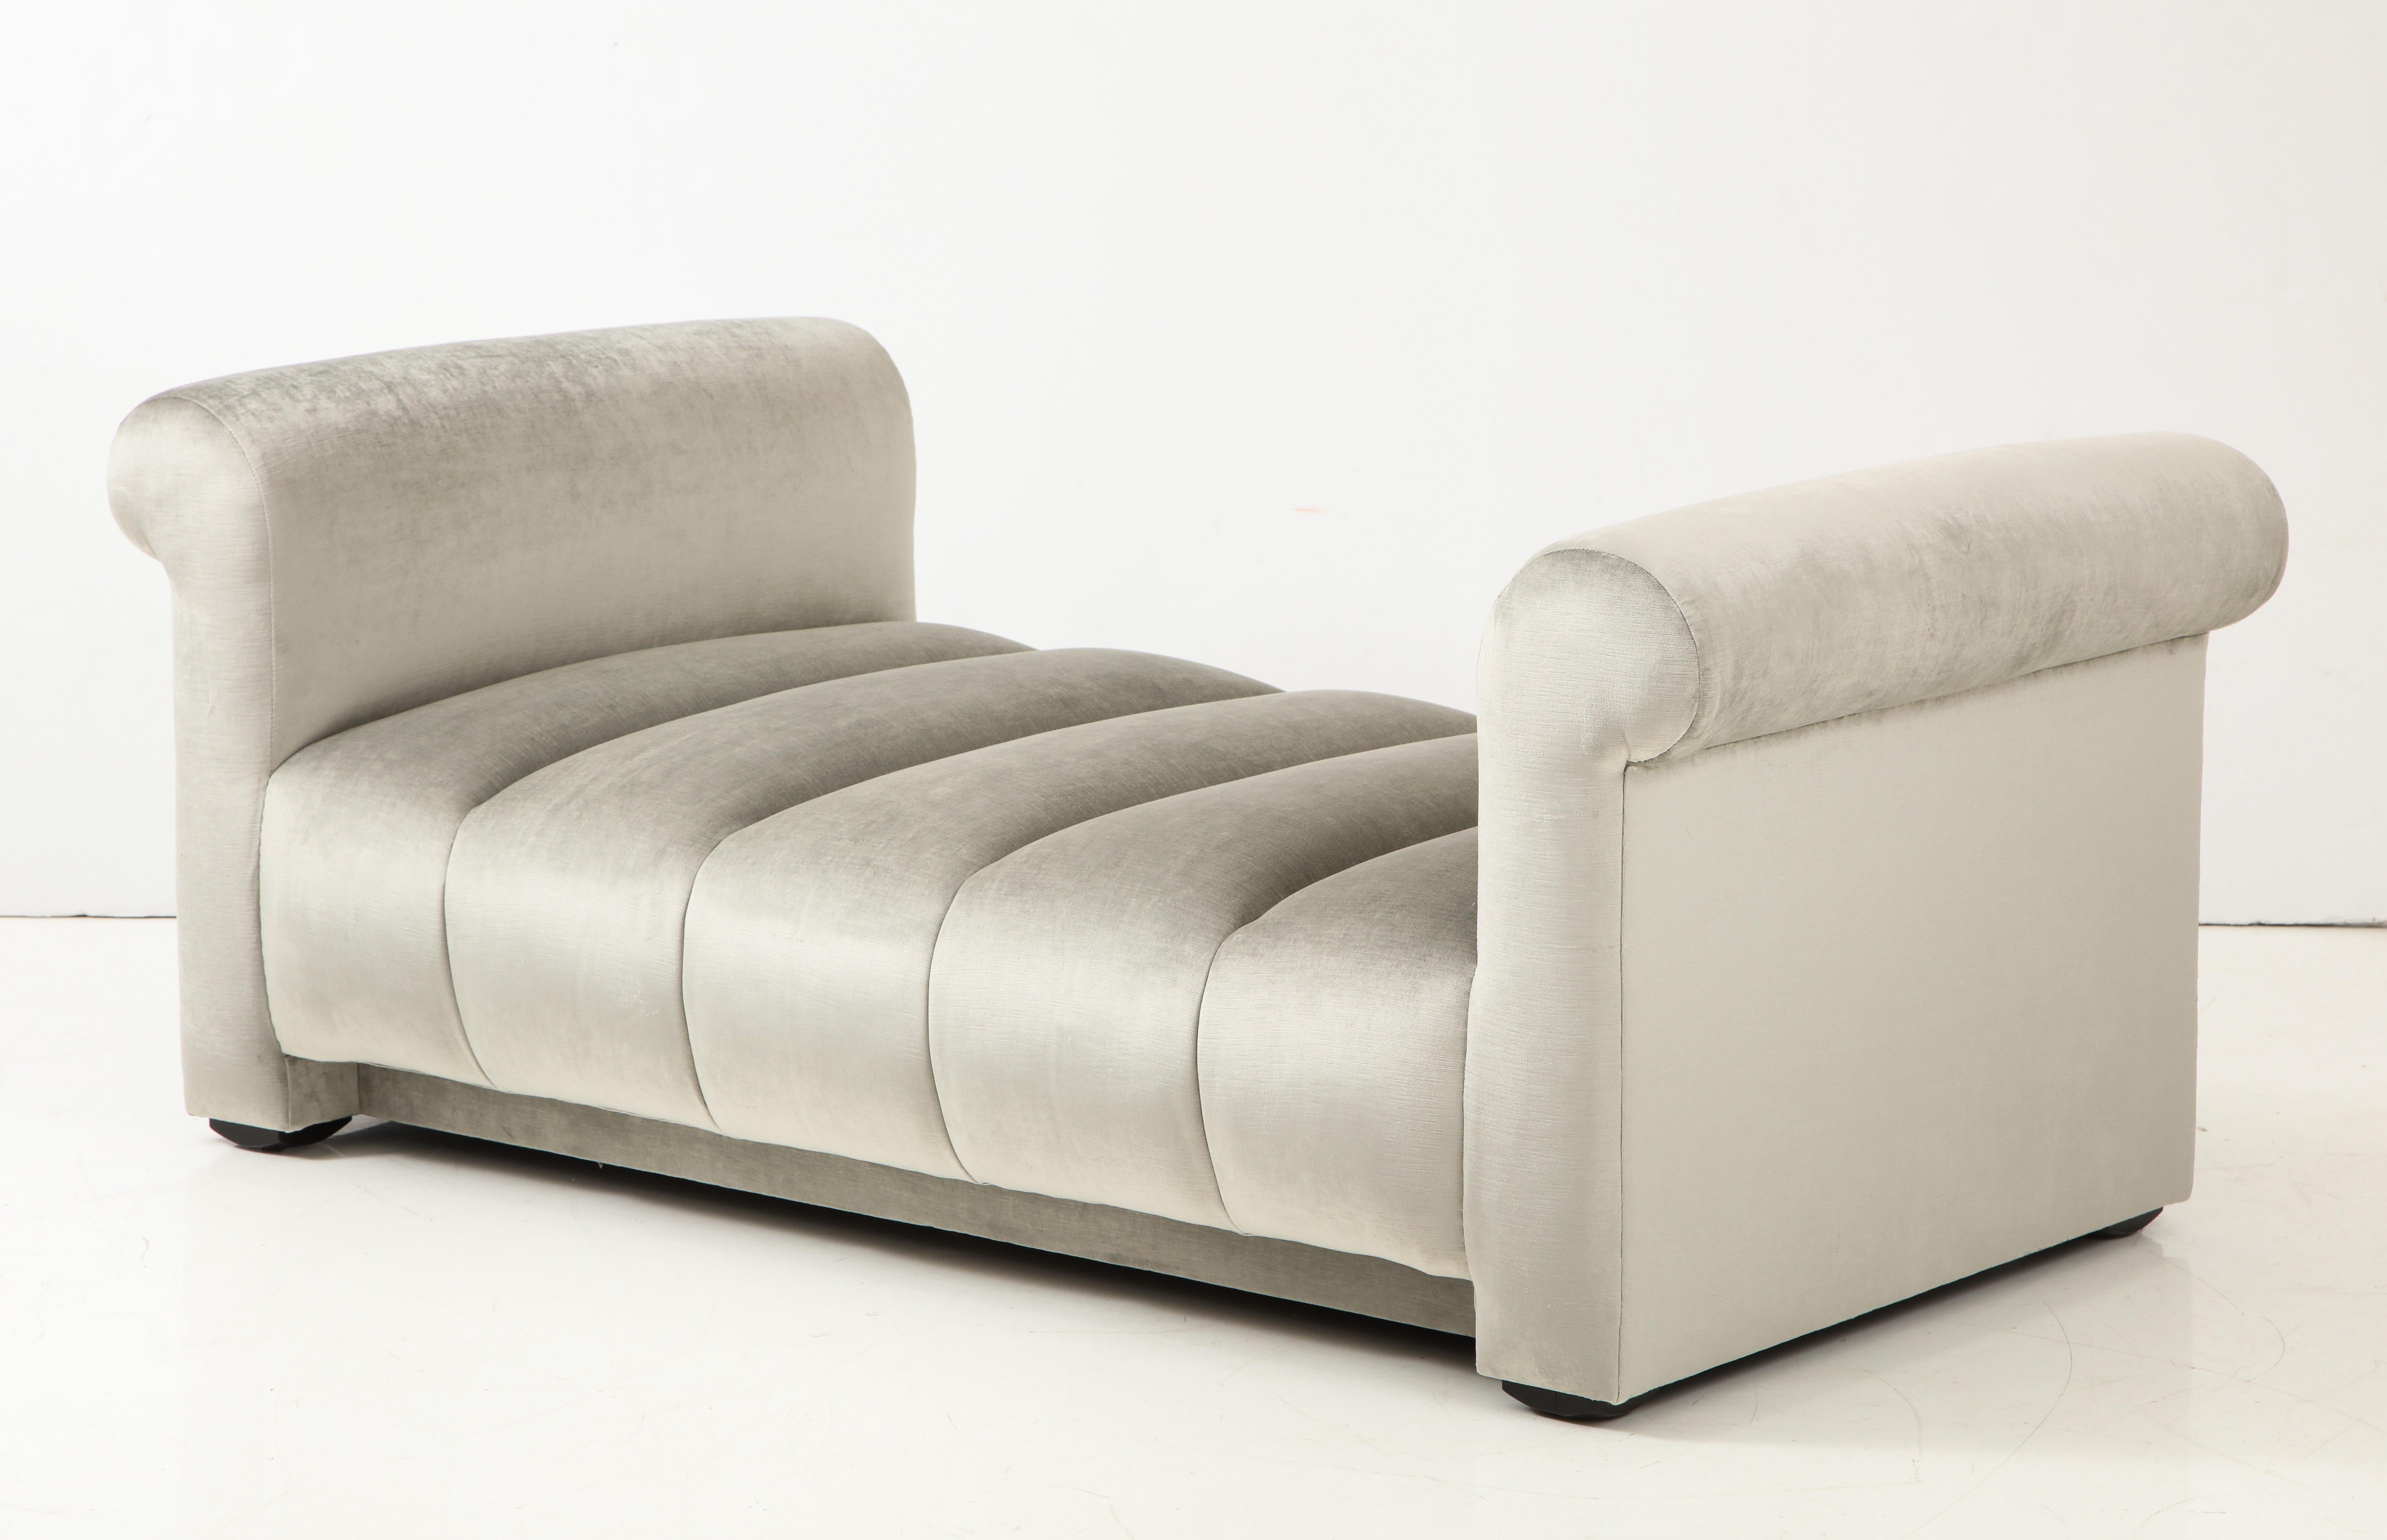 American Custom Designed Chaise Lounge by Steve Chase